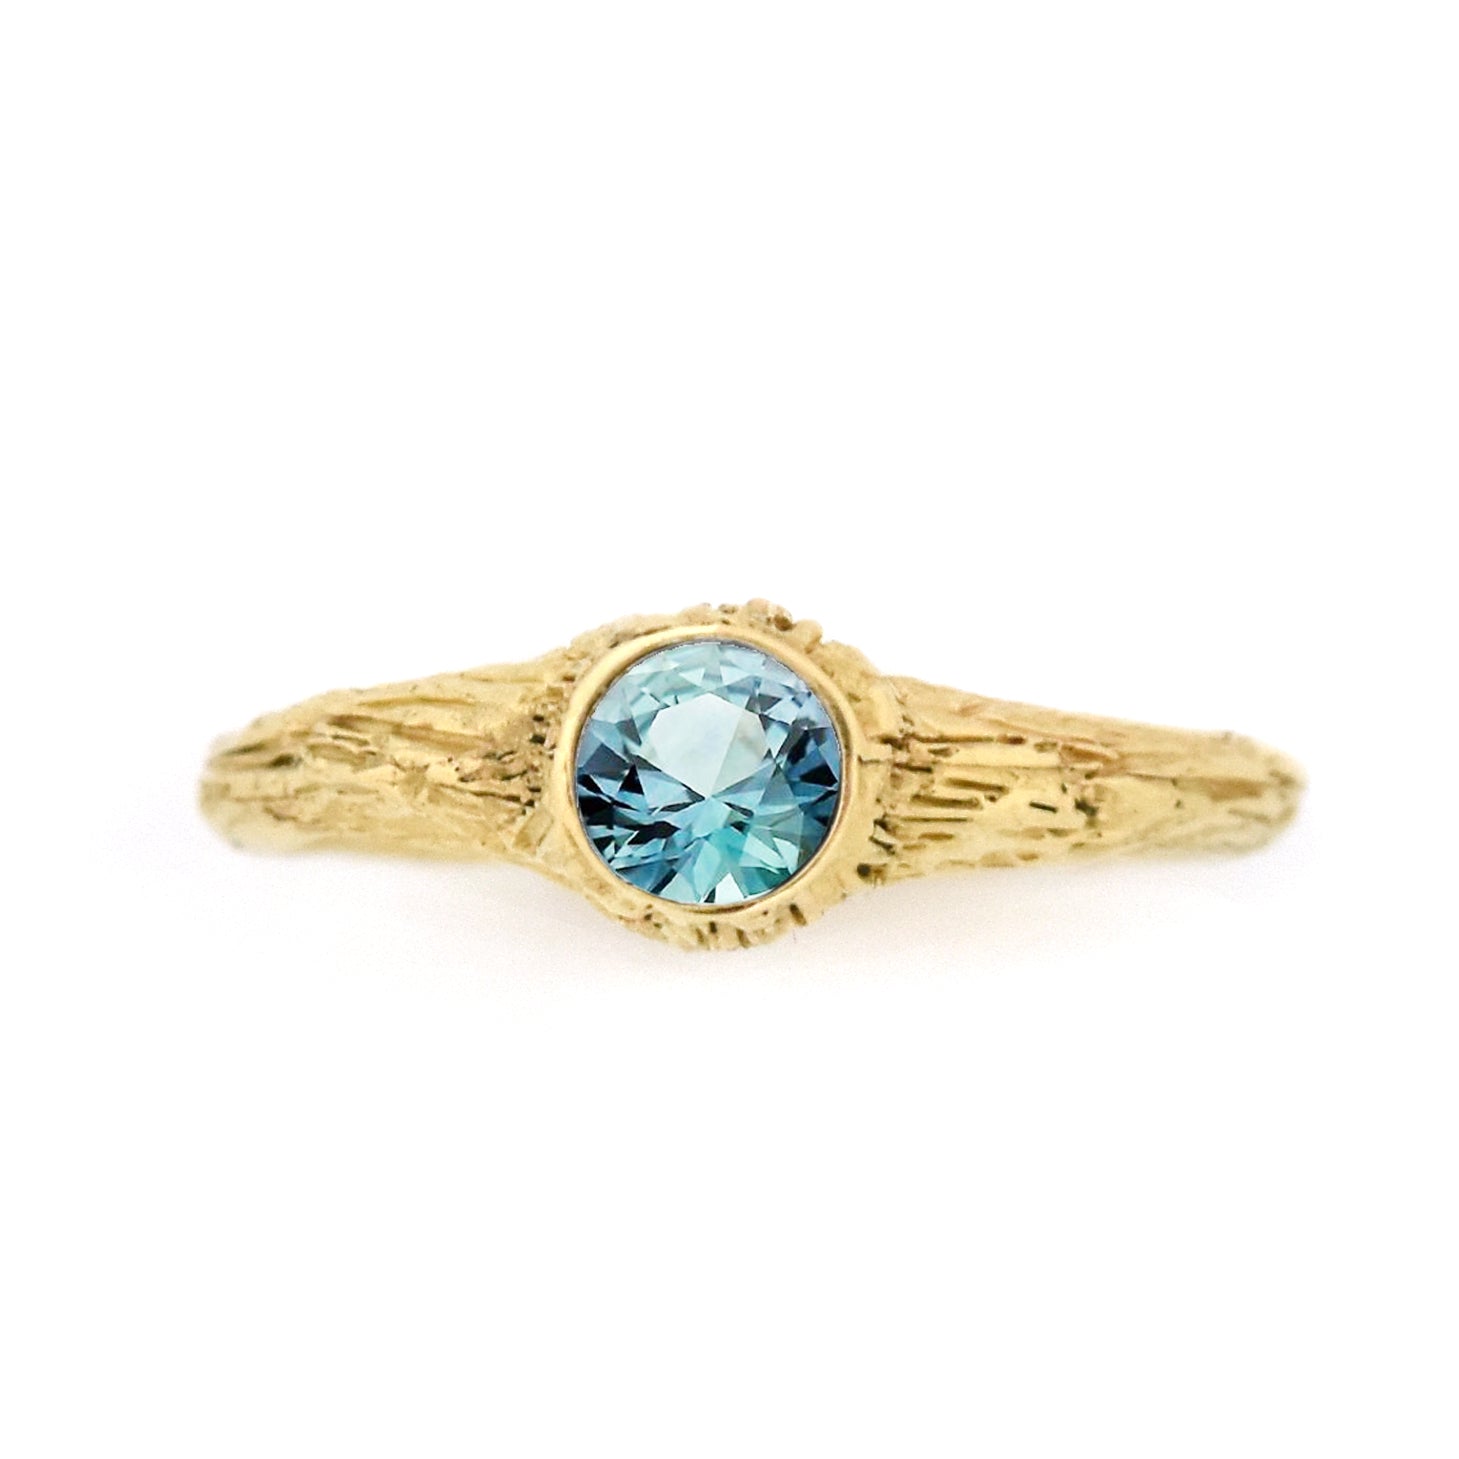 Gold Heartwood Diamond Ring - your choice of 5mm stone & gold - Wedding Ring Recycled Diamond / 14K Yellow Gold Conflict Free Diamond / 14K Yellow Gold 6325 - handmade by Beth Millner Jewelry